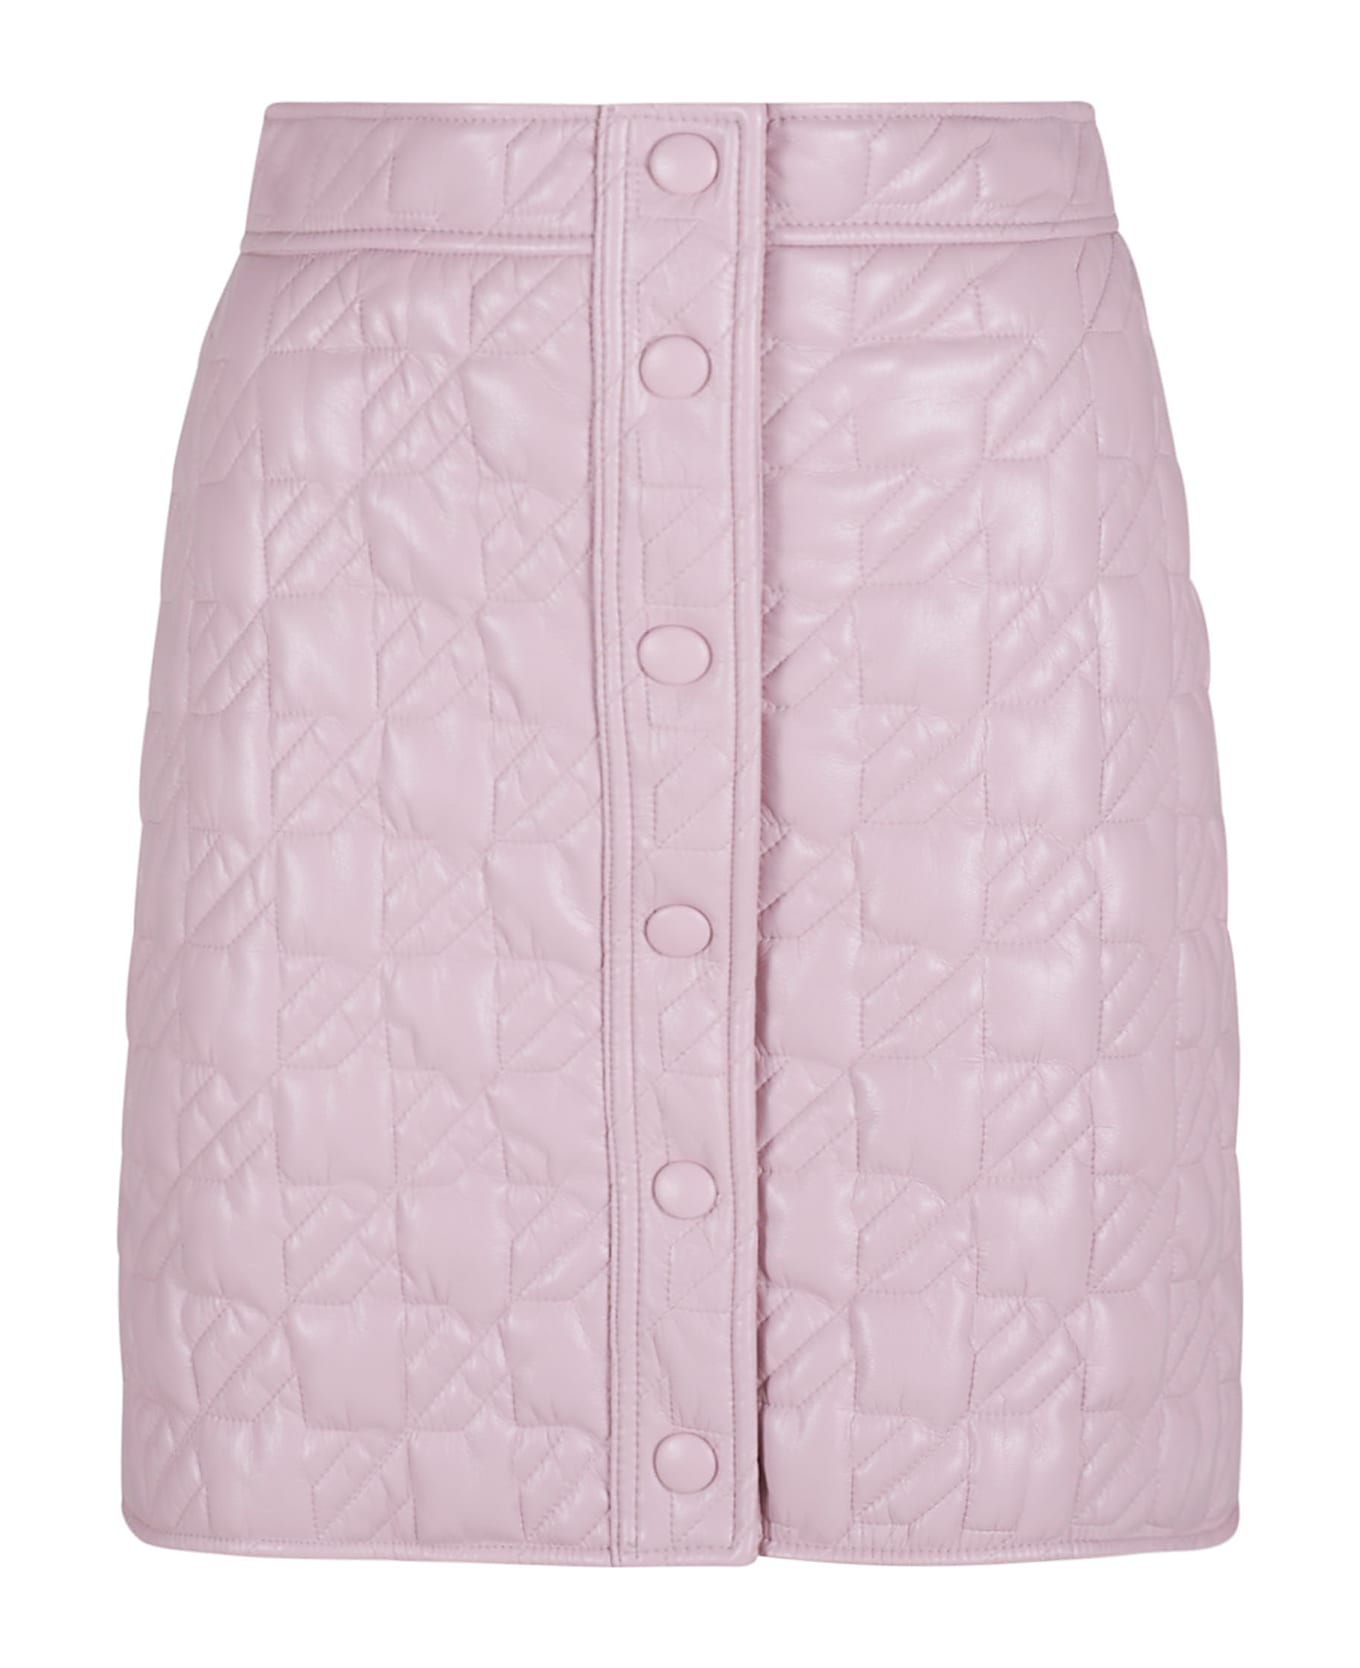 MSGM Quilted Buttoned Skirt - Pink スカート